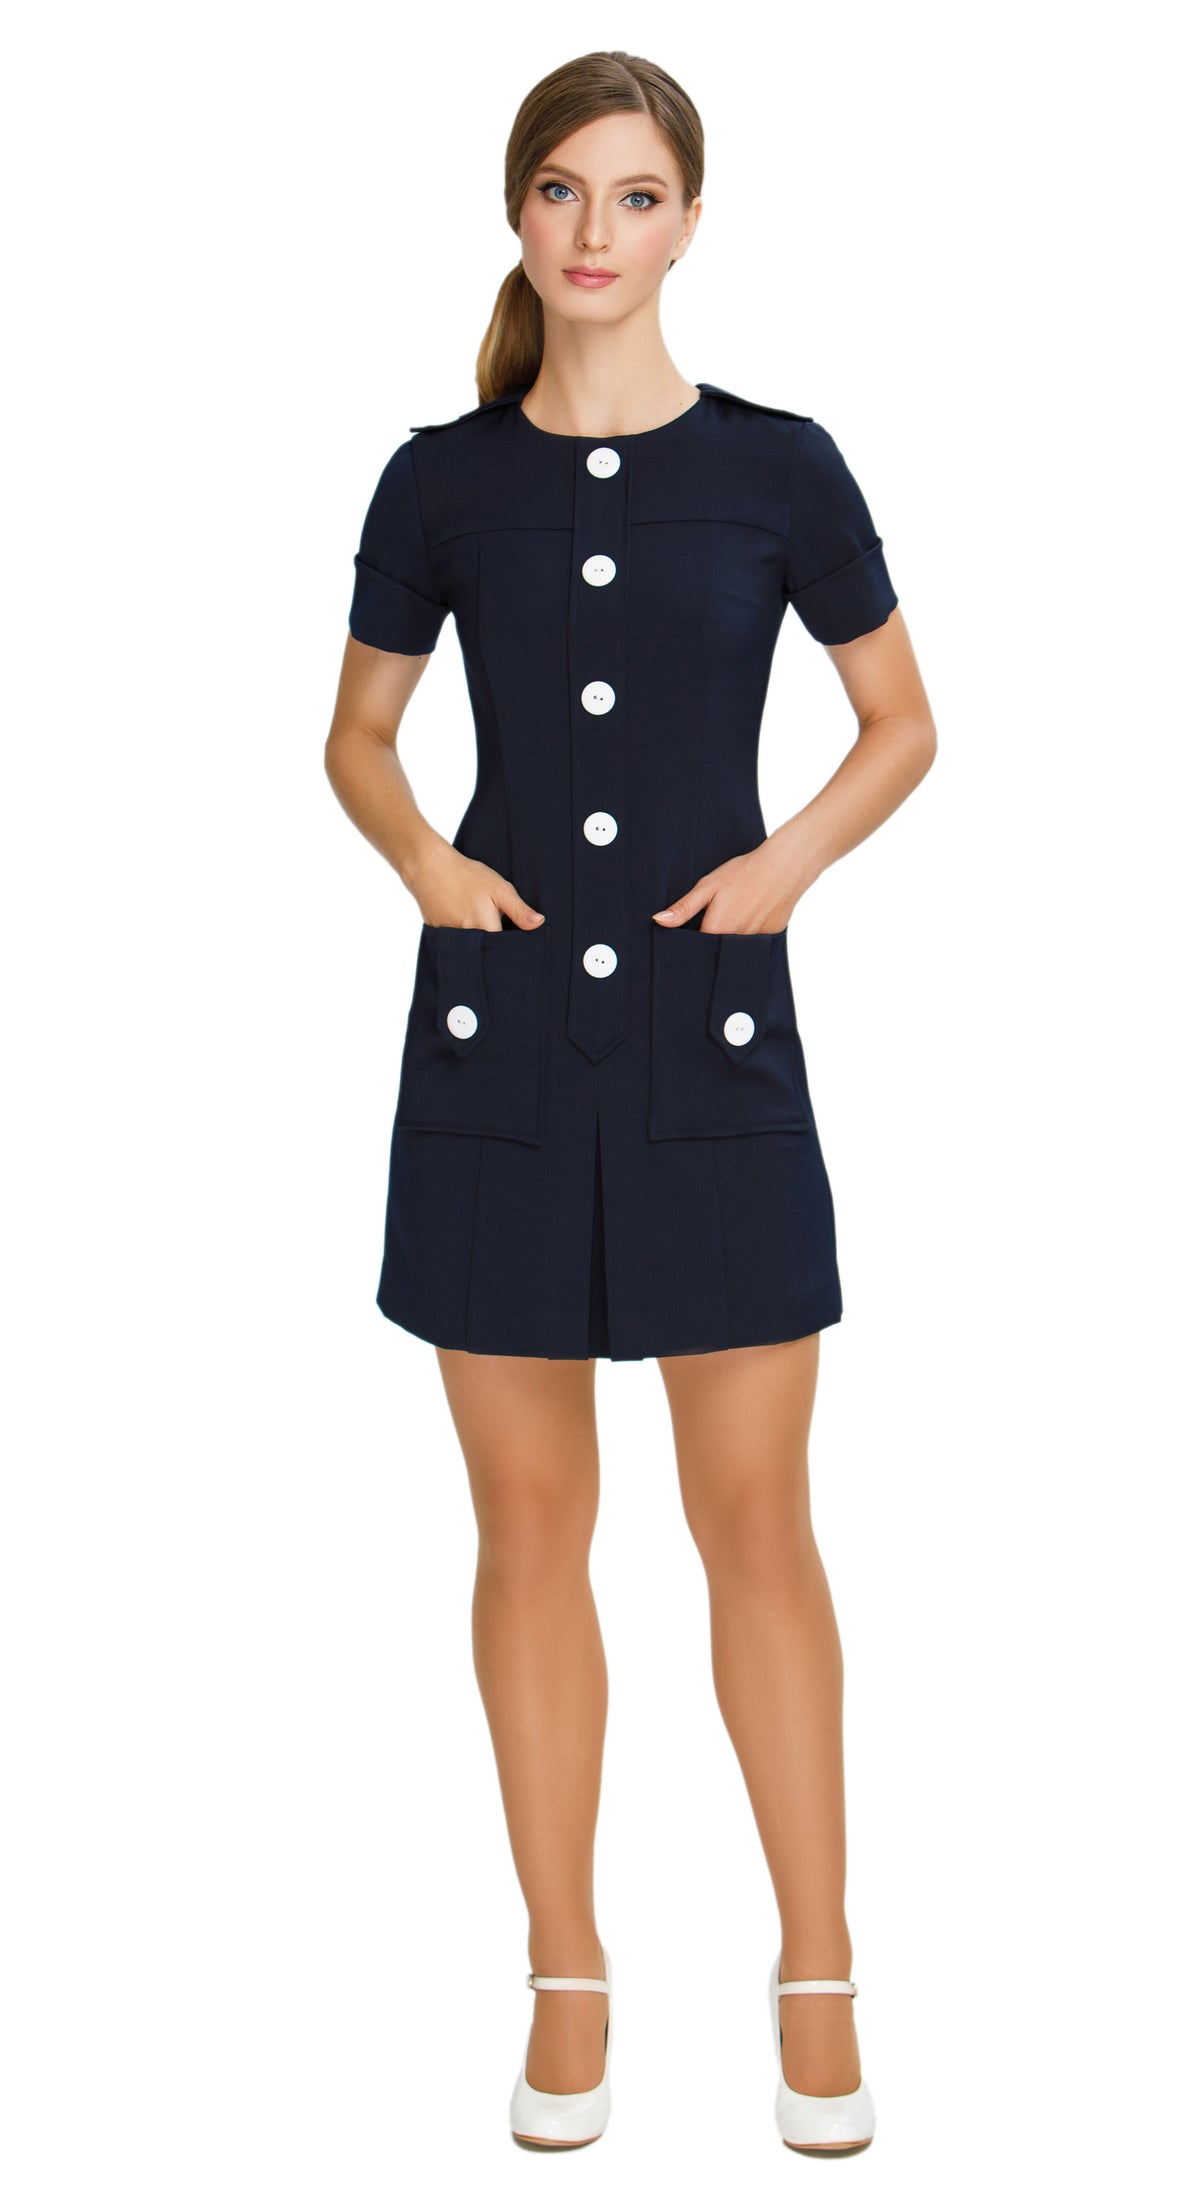 Elevate your wardrobe with our Fitted Sixties Style Dress; perfect for work or play. This dress boasts a uniformed aesthetic, flattering panel craftsmanship, and decorative button torso detailing. With deep skirt pockets, a front pleat, and decorative button-down shoulder tabs, it combines elegance and functionality effortlessly. 